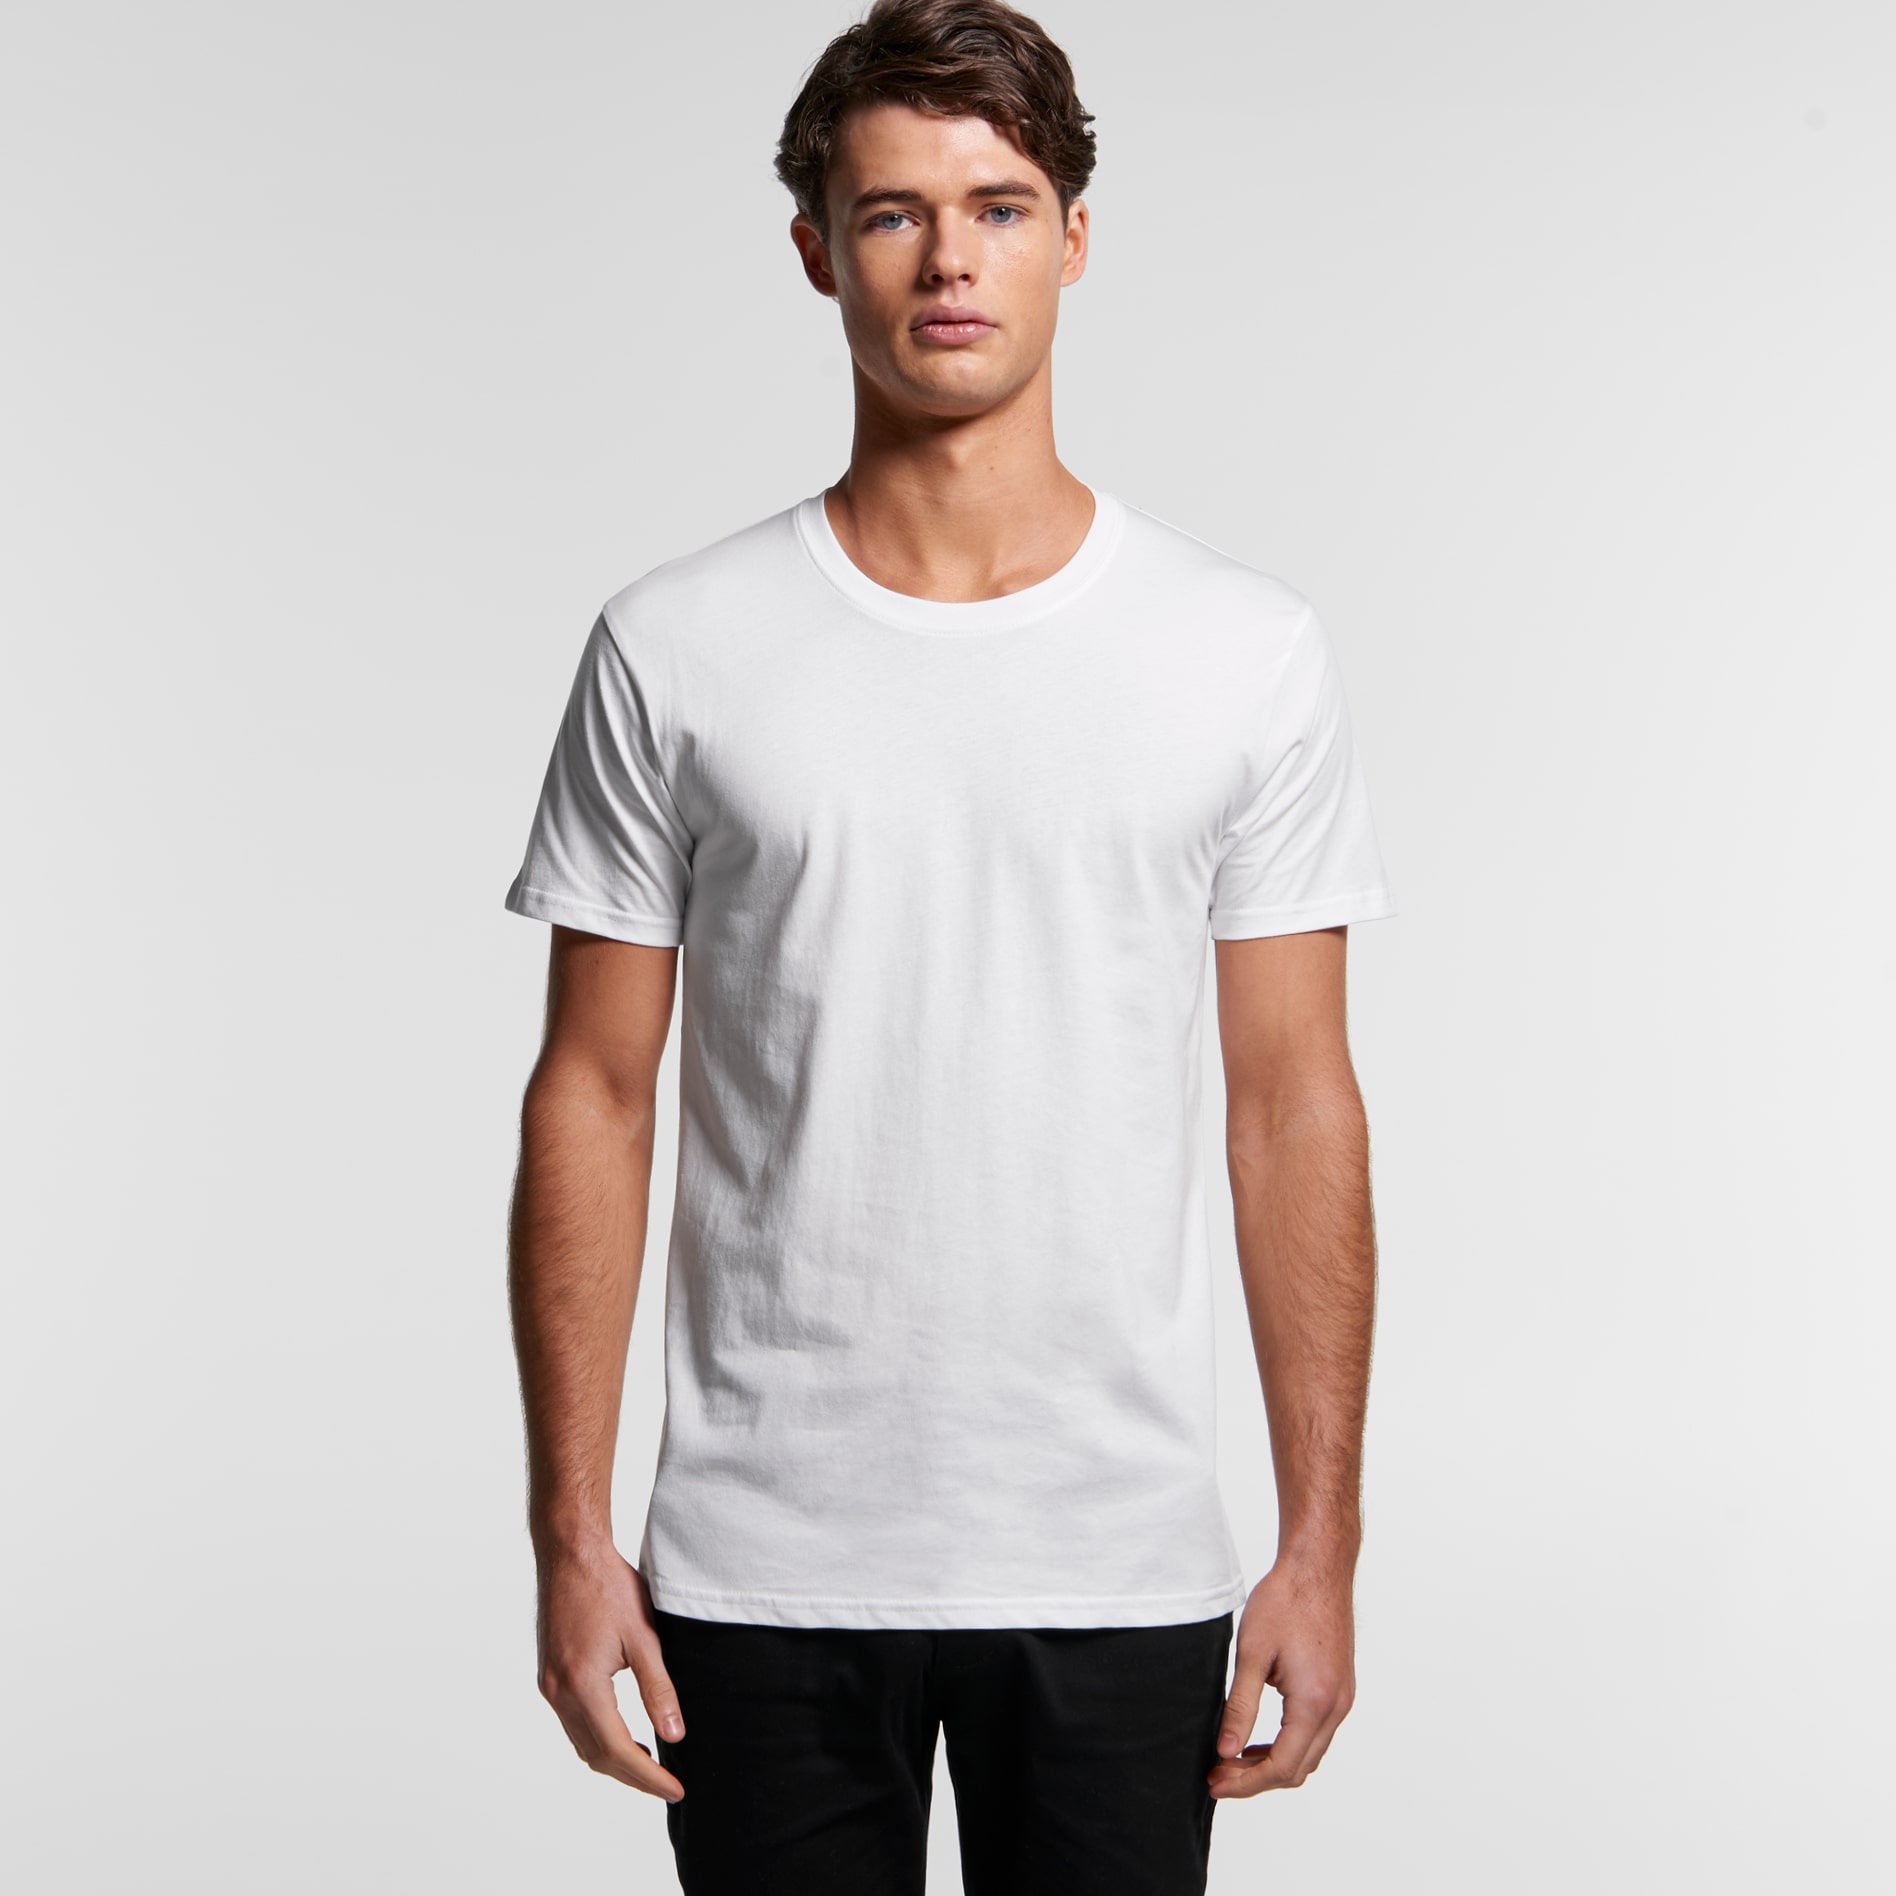 T shirt embroidery - 5501g staple organic tee front